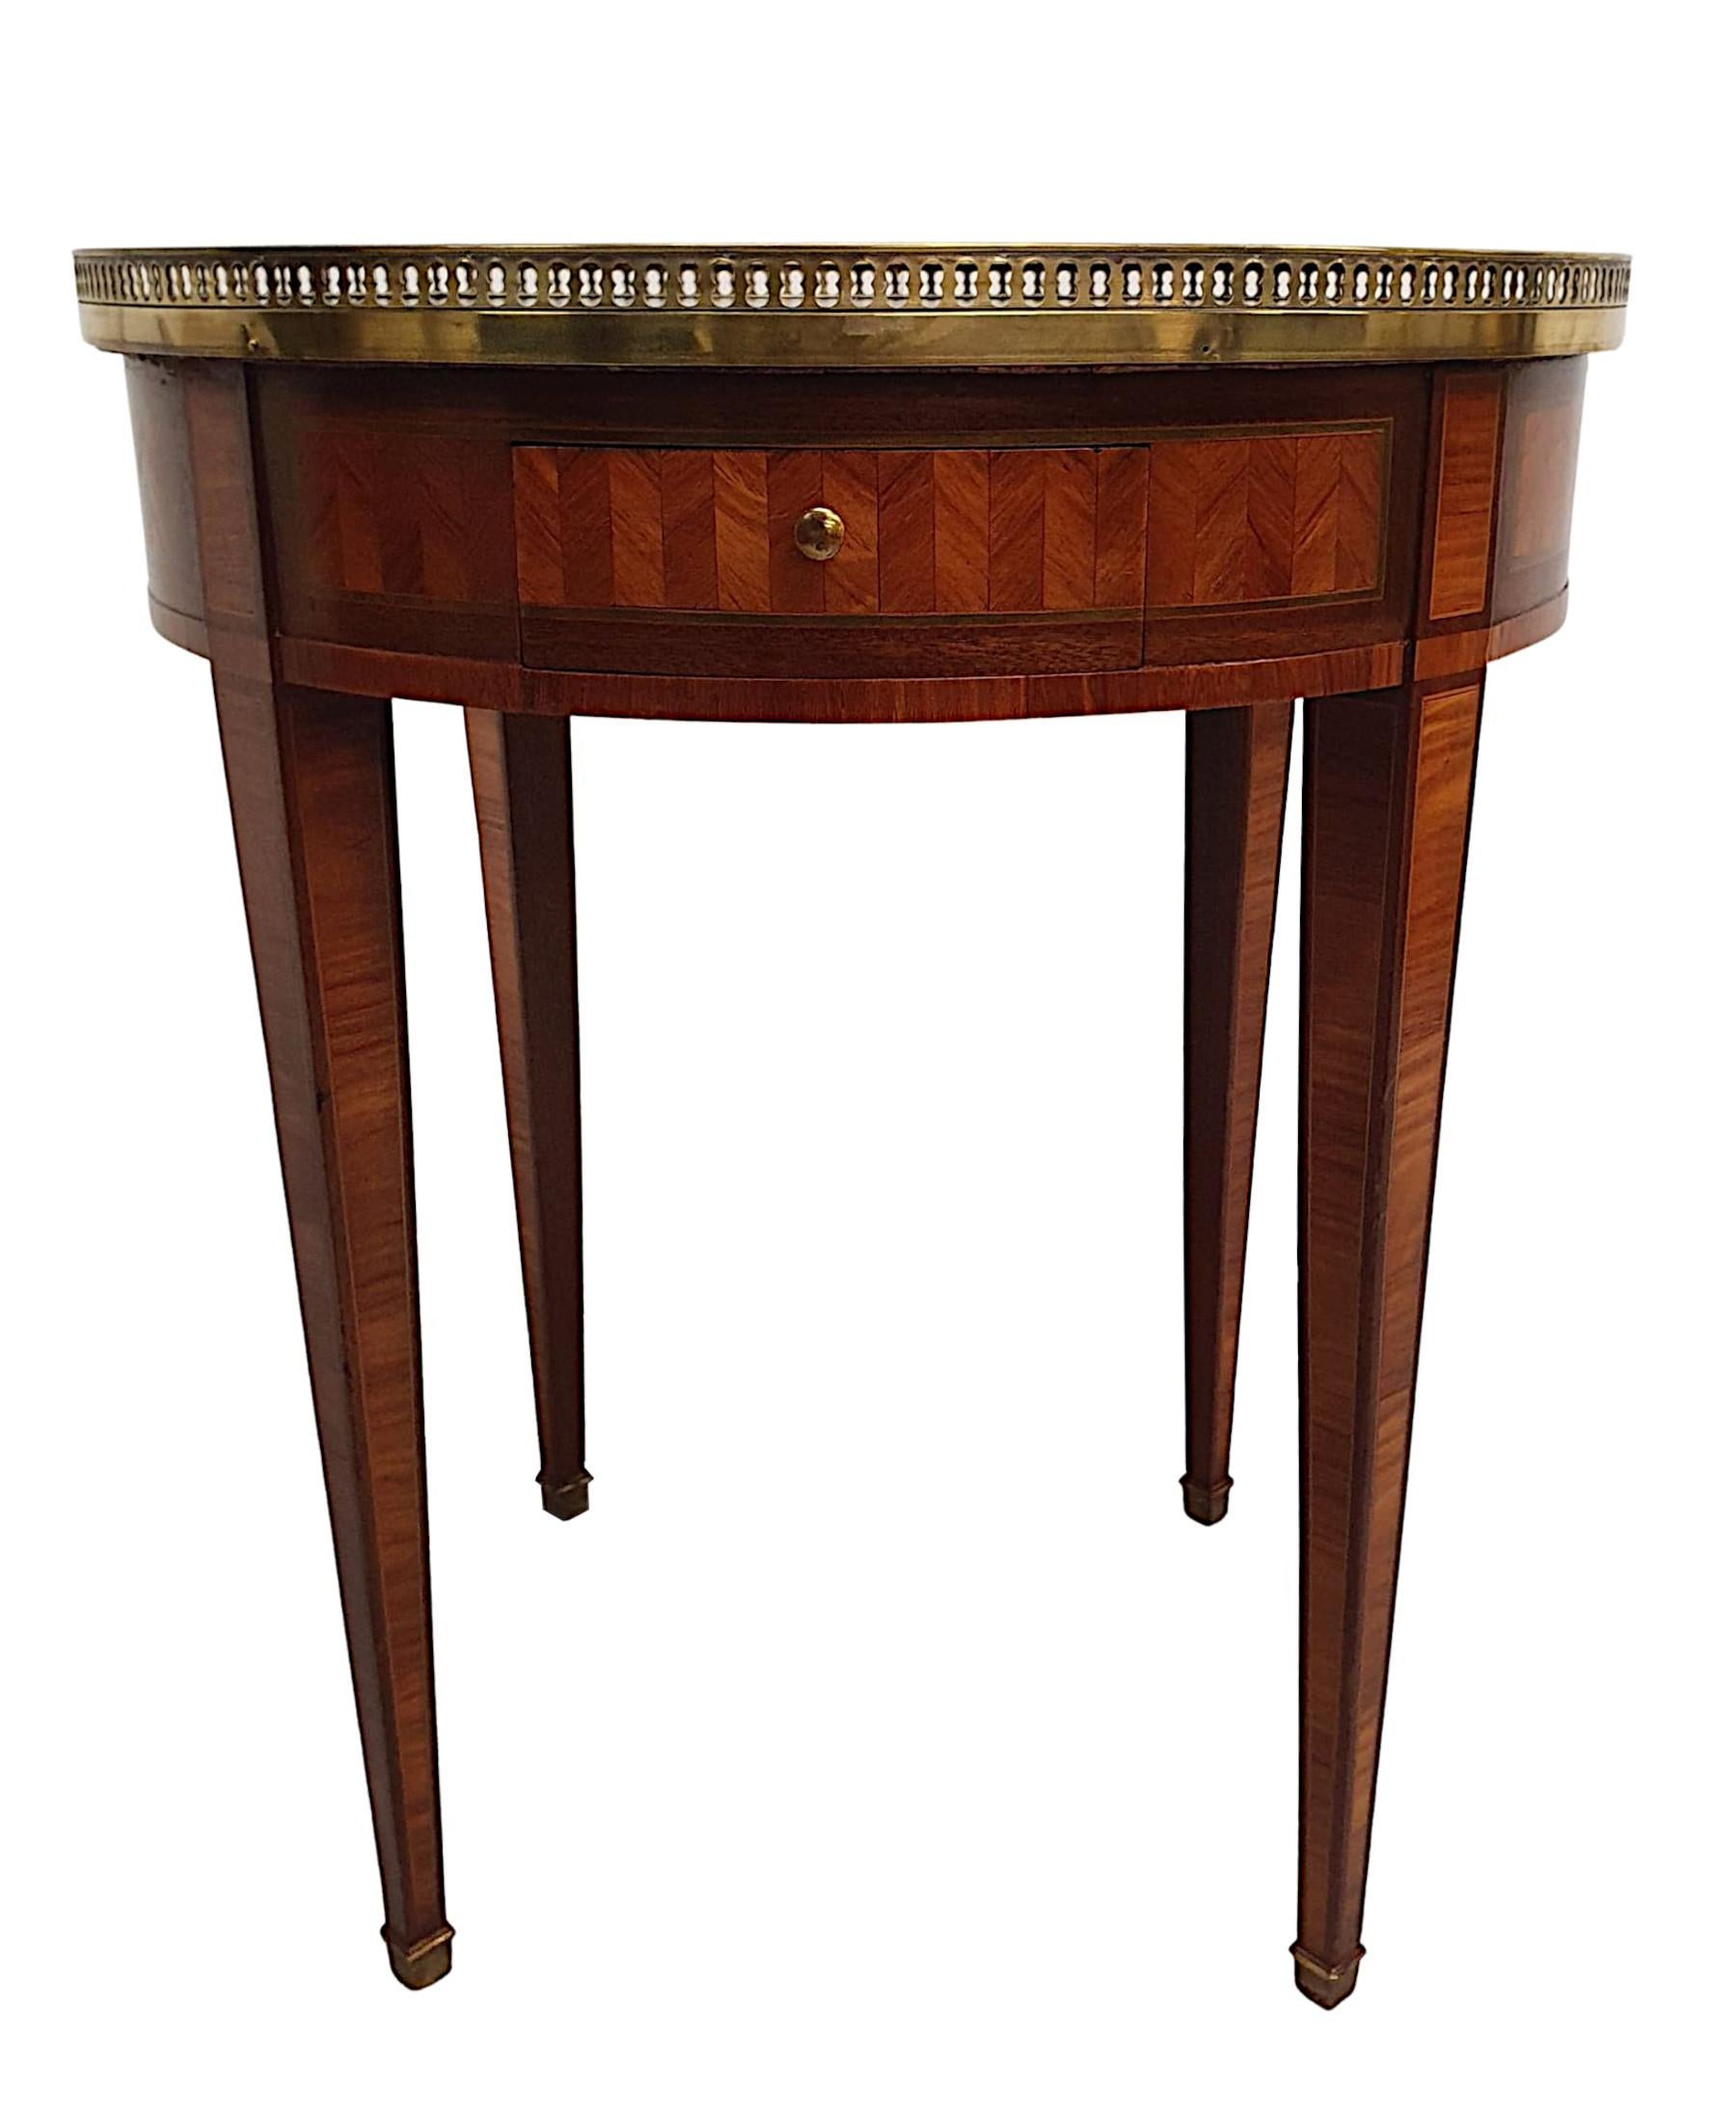 A gorgeous Edwardian centre table of exceptional quality, finely carved, crossbanded and line inlaid throughout with richly patinated timbers comprising of mahogany, tulipwood and walnut. The moulded top of circular form surmounted with decorative